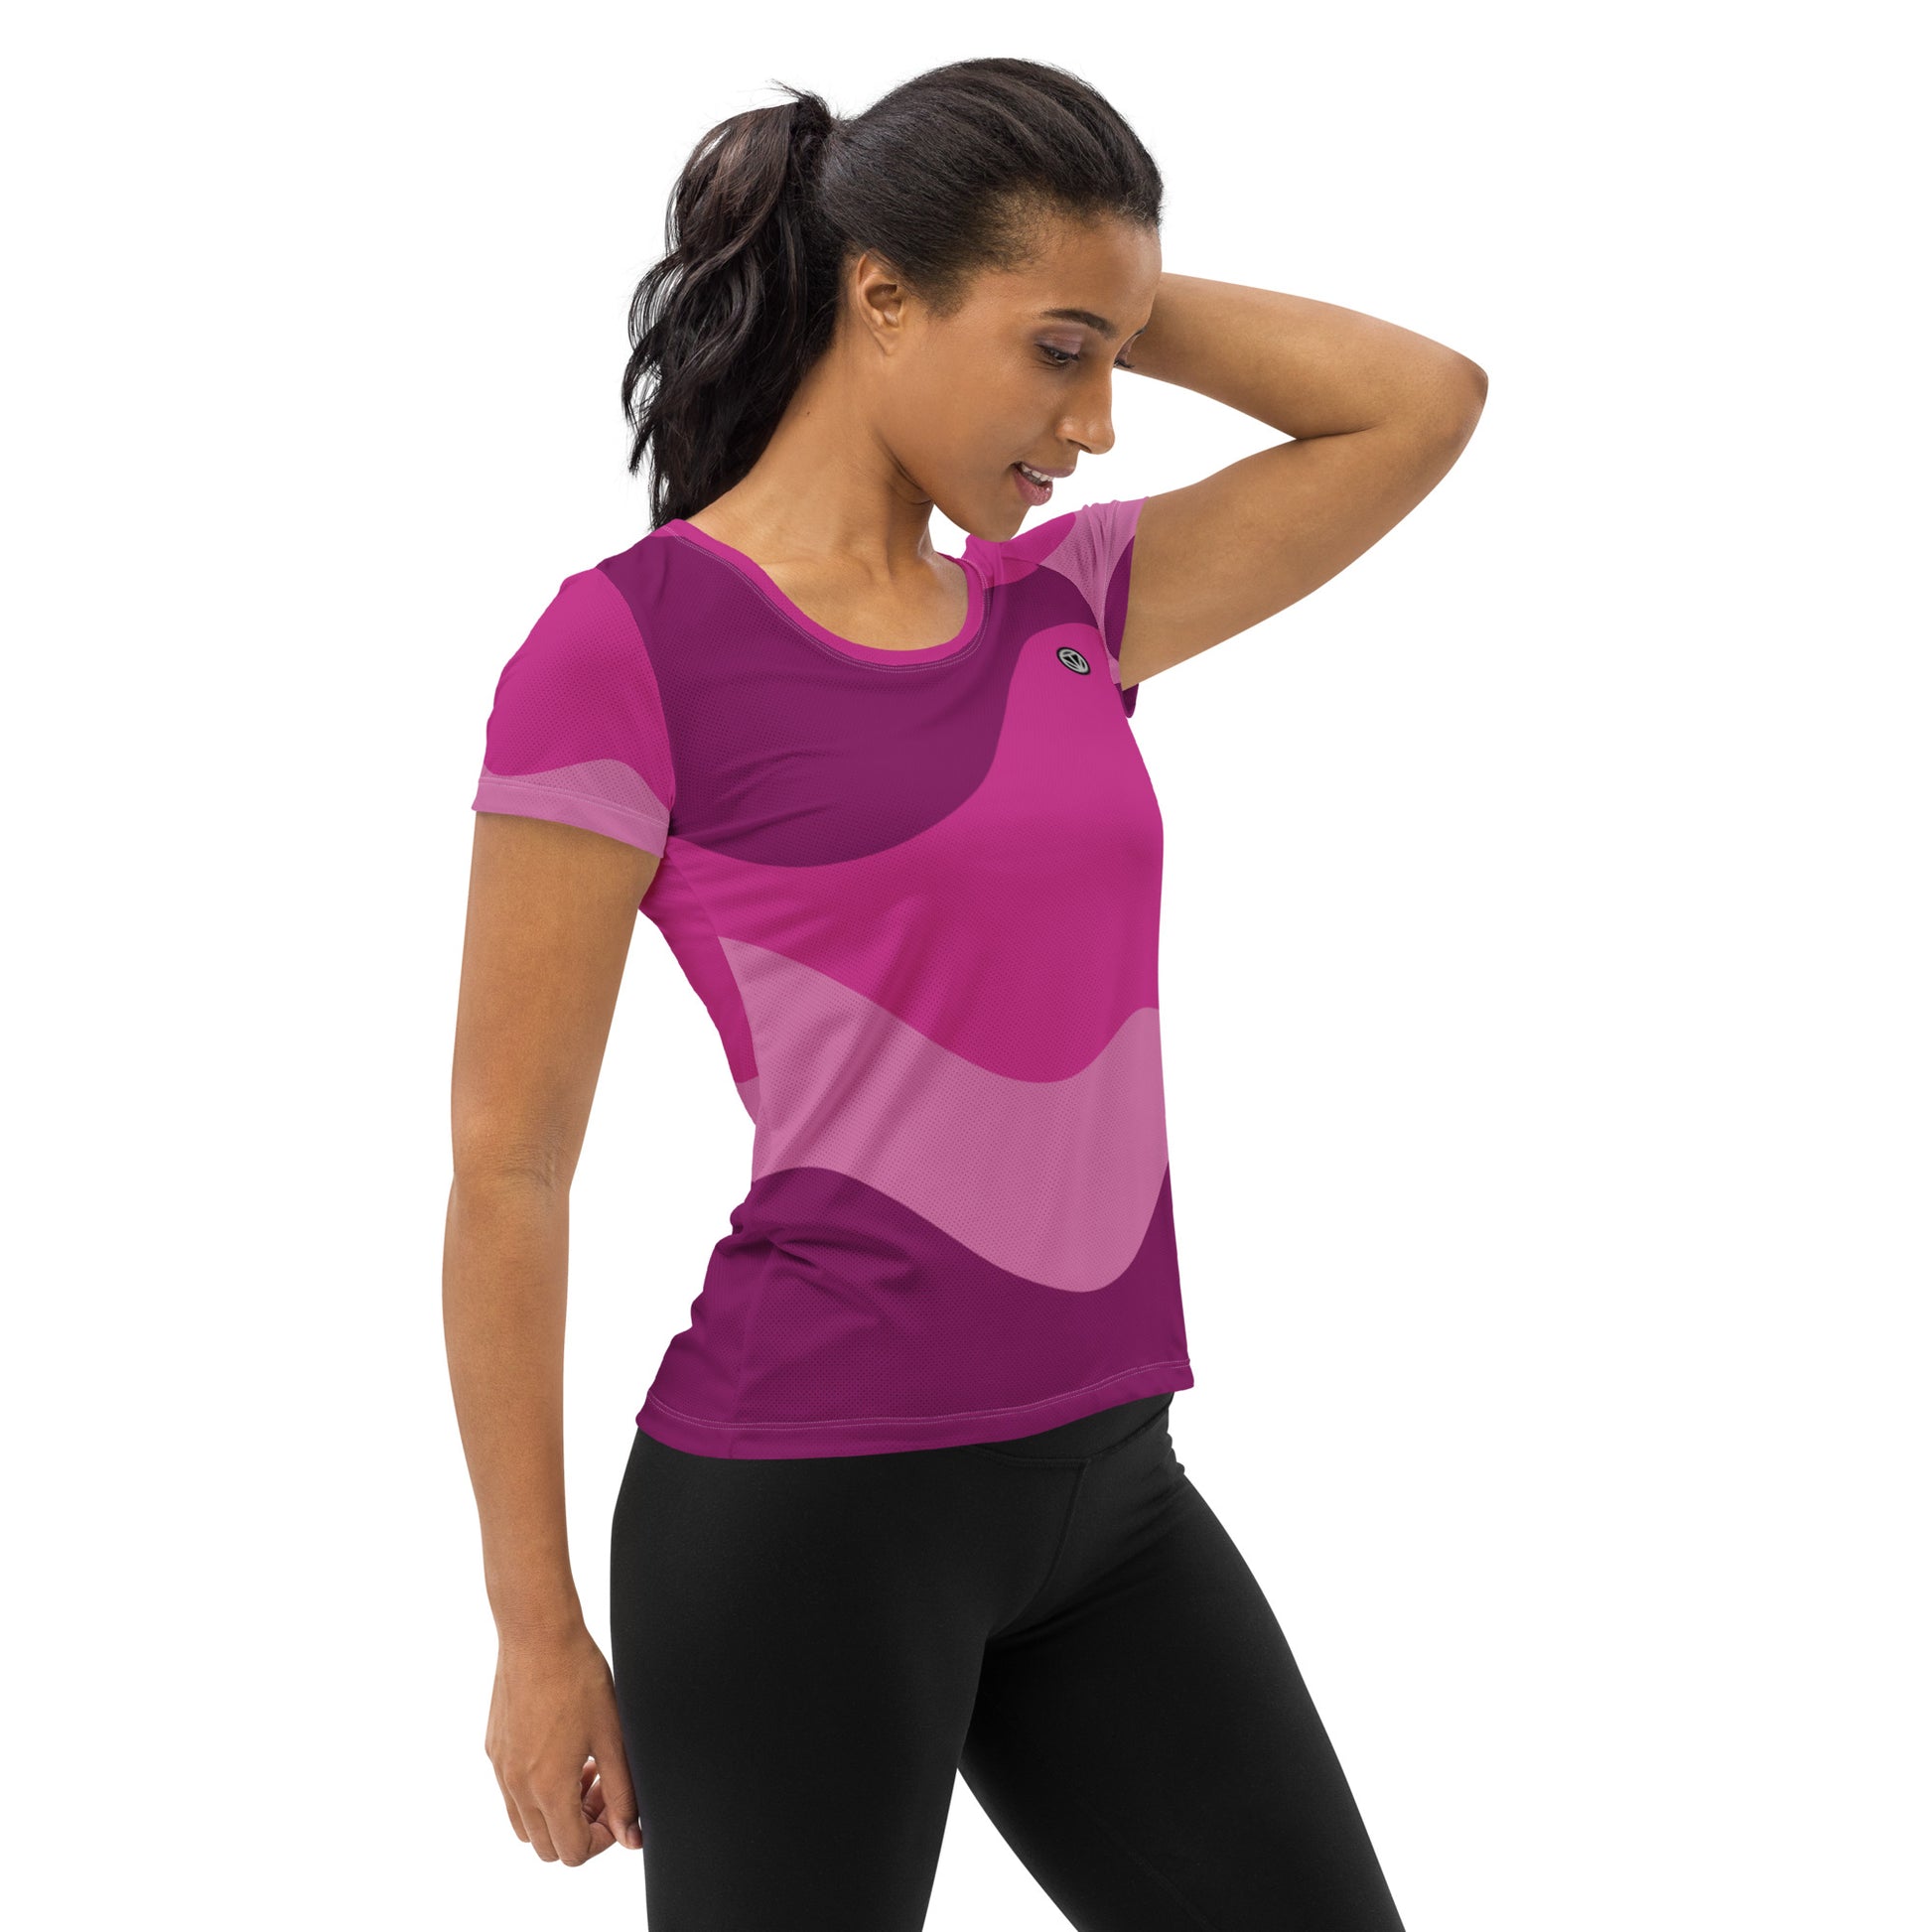 TIME OF VIBES - Women's Athletic T-shirt ABSTRACT (Pink) - €45.00